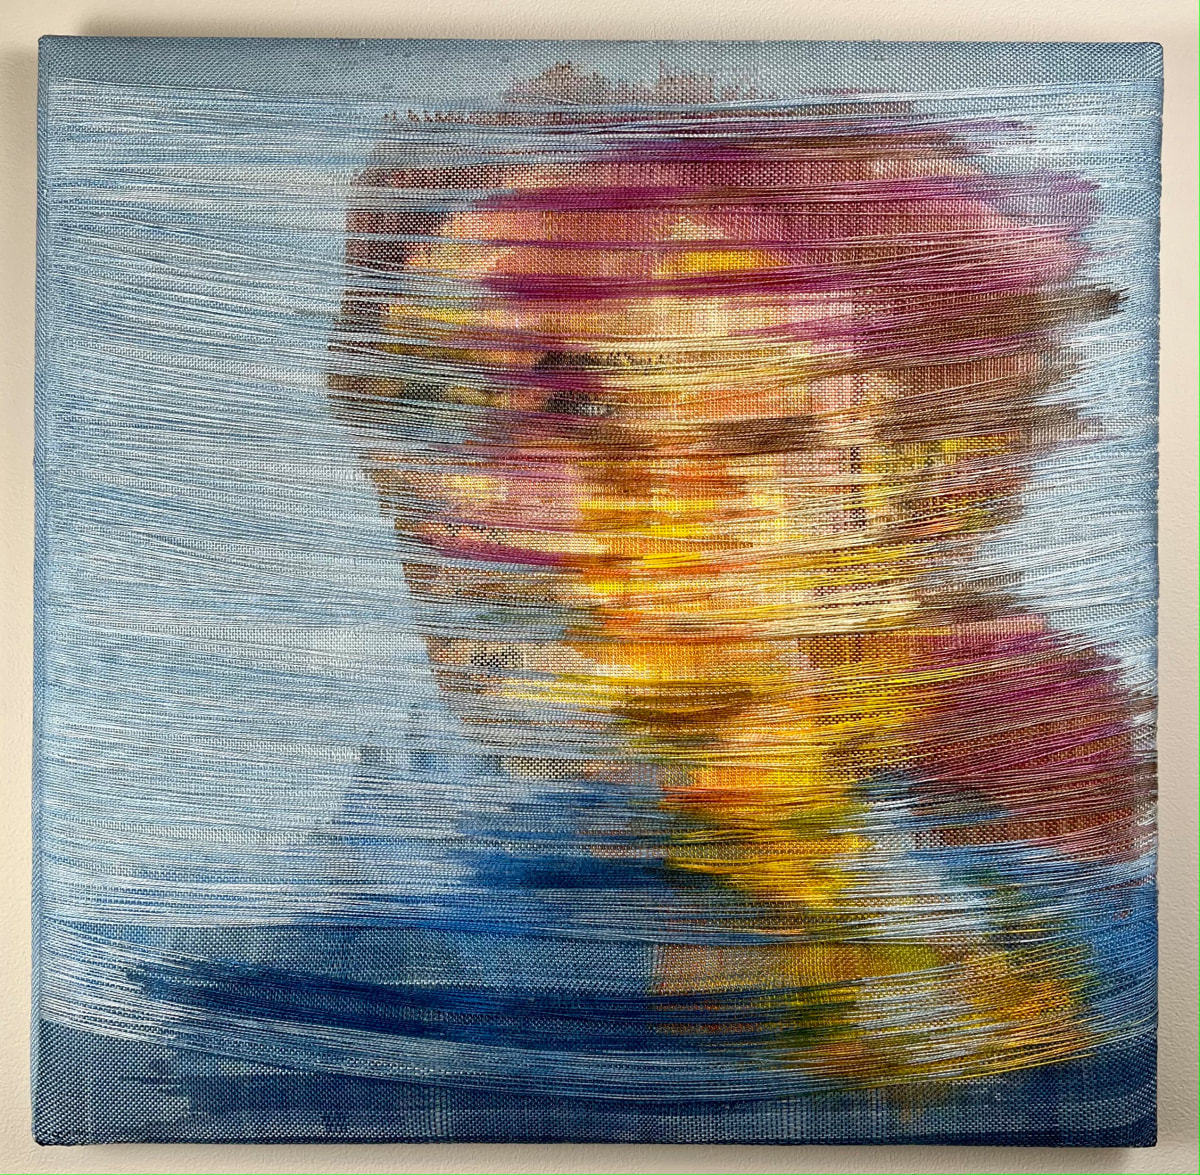 Dormant by Melissa English Campbell  Image: Dormant. 2023. 20 ½”  x 21”. Warp and weft painted woven tapestry. Portrait of a woman looking sideways into the distance.  Running in the foreground are long yarns loosely mirroring her silhouette.
